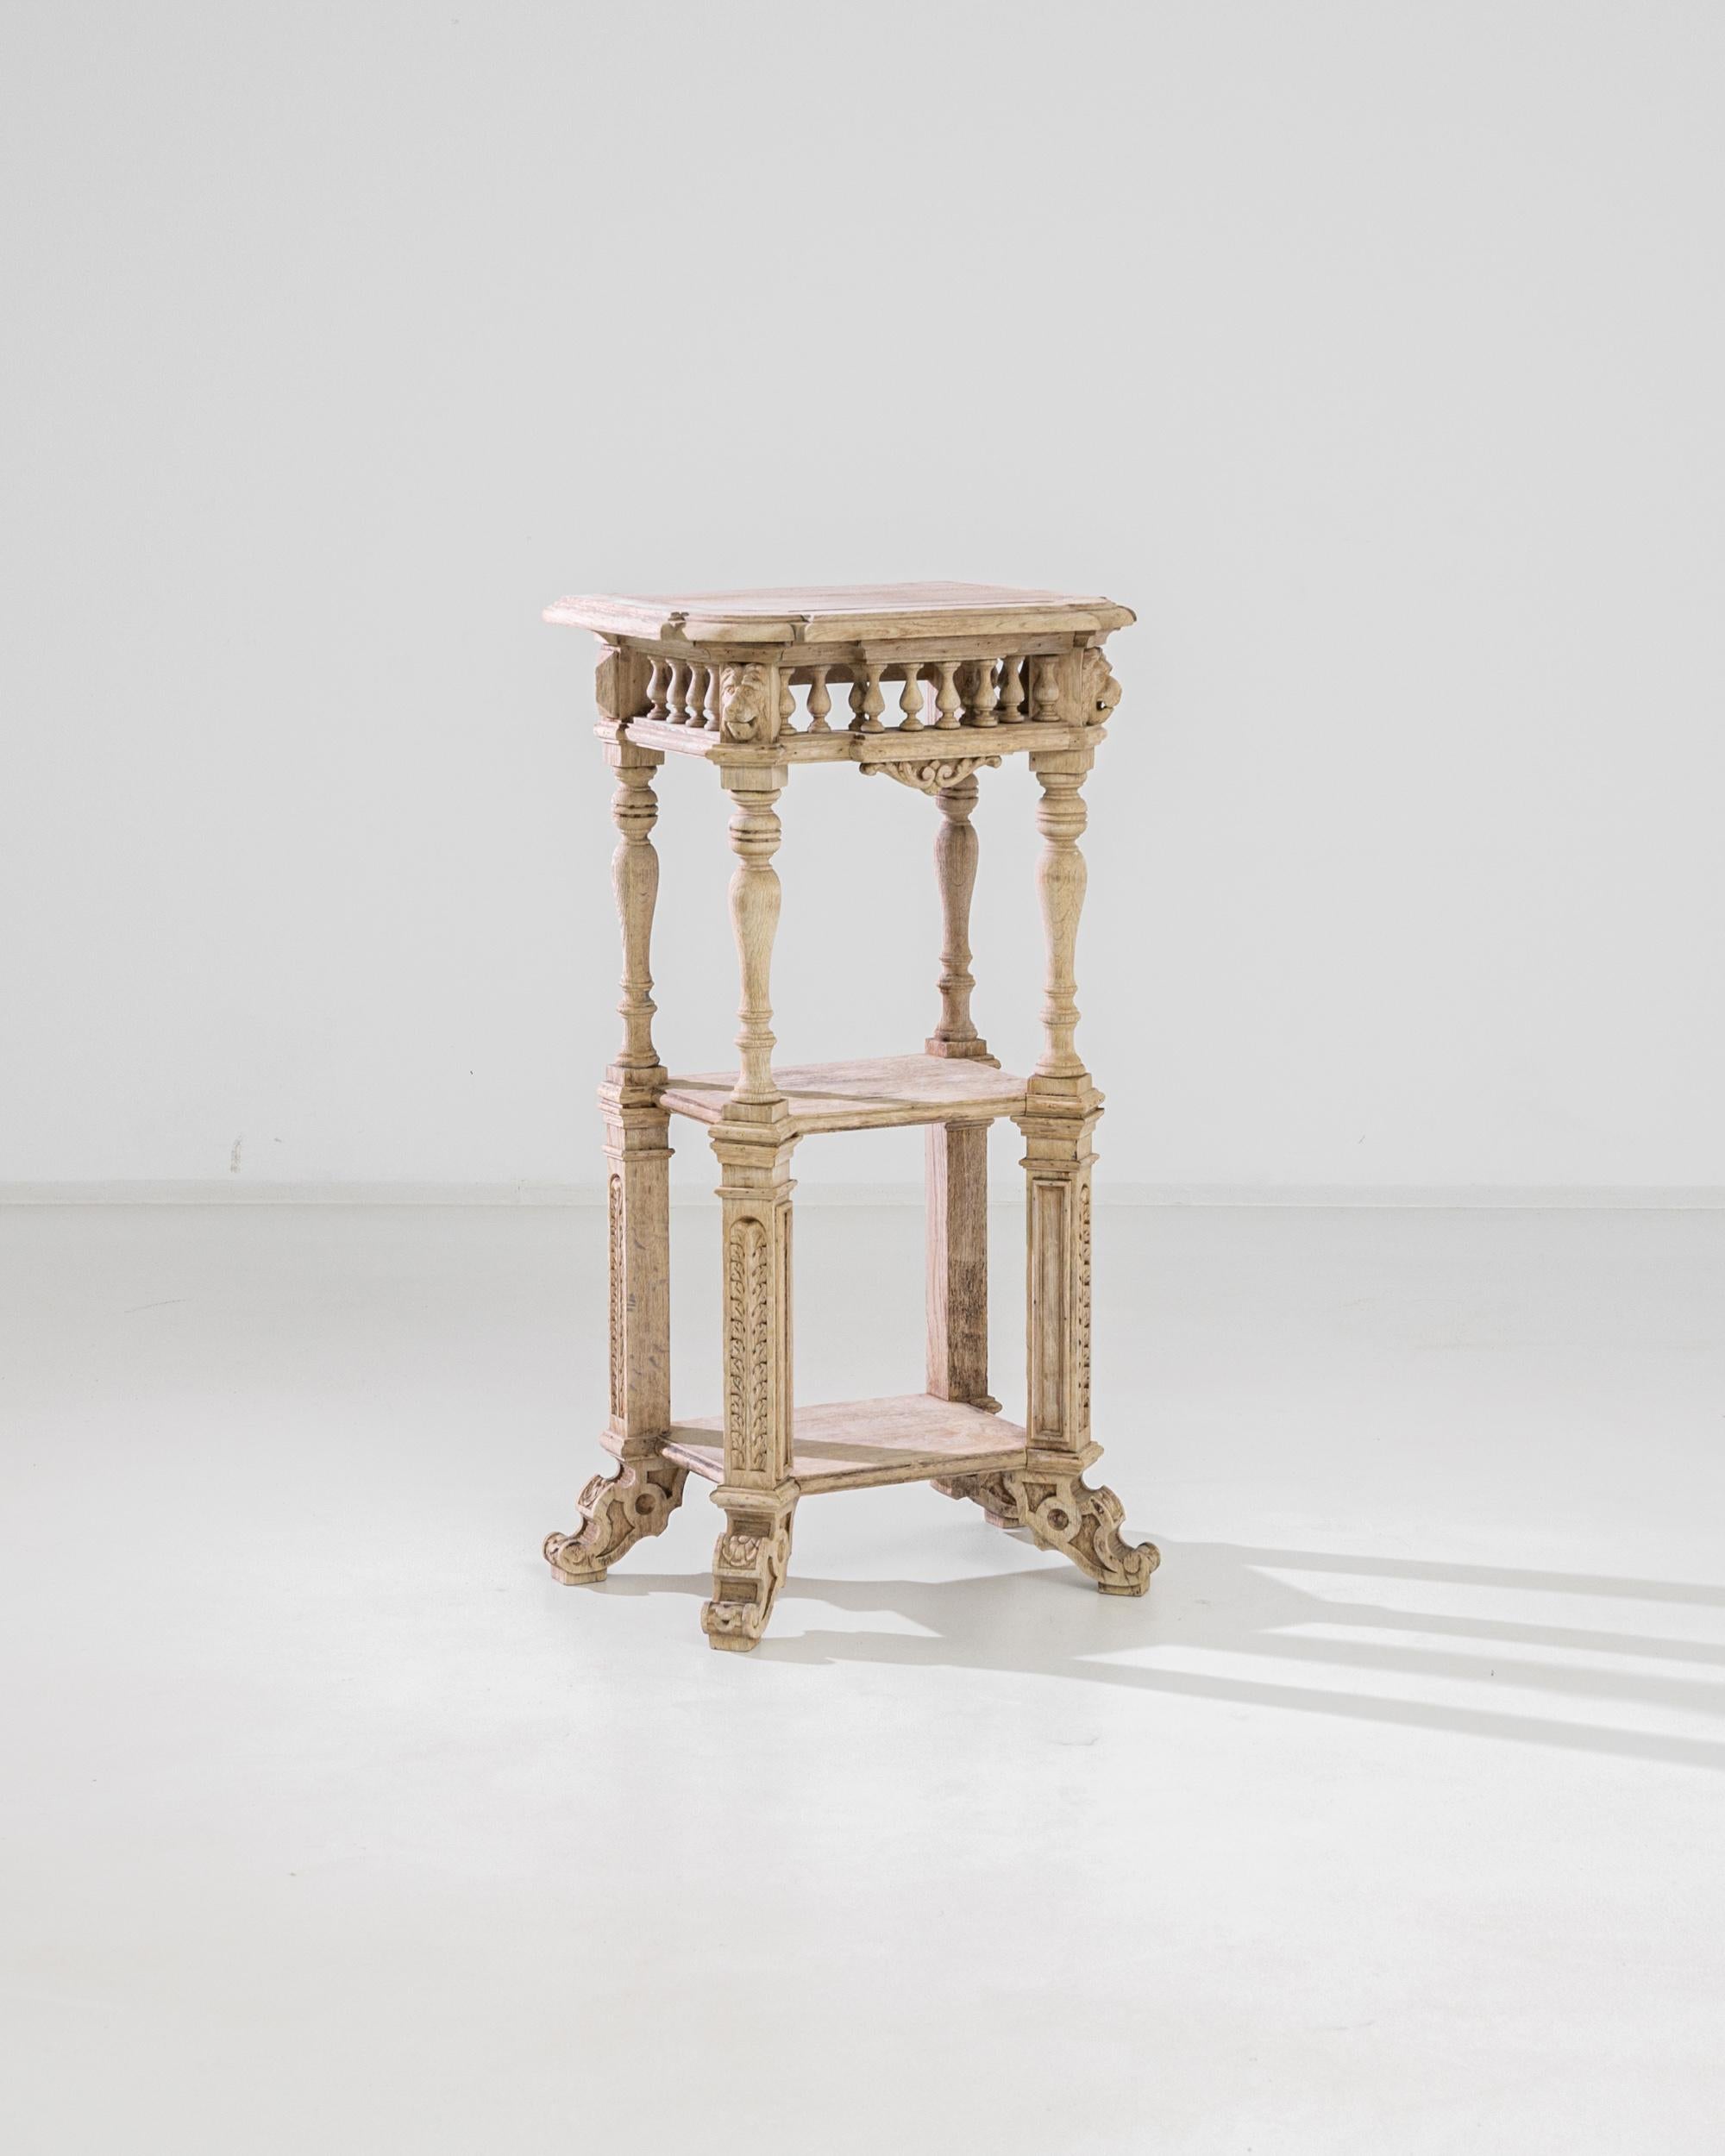 A bleached oak console table from Belgium, produced circa 1880. An ornate antique console table standing three feet tall on four style changing, two-tier legs supported by ornately carved feet featuring prominent flower motifs. Crowning the legs are